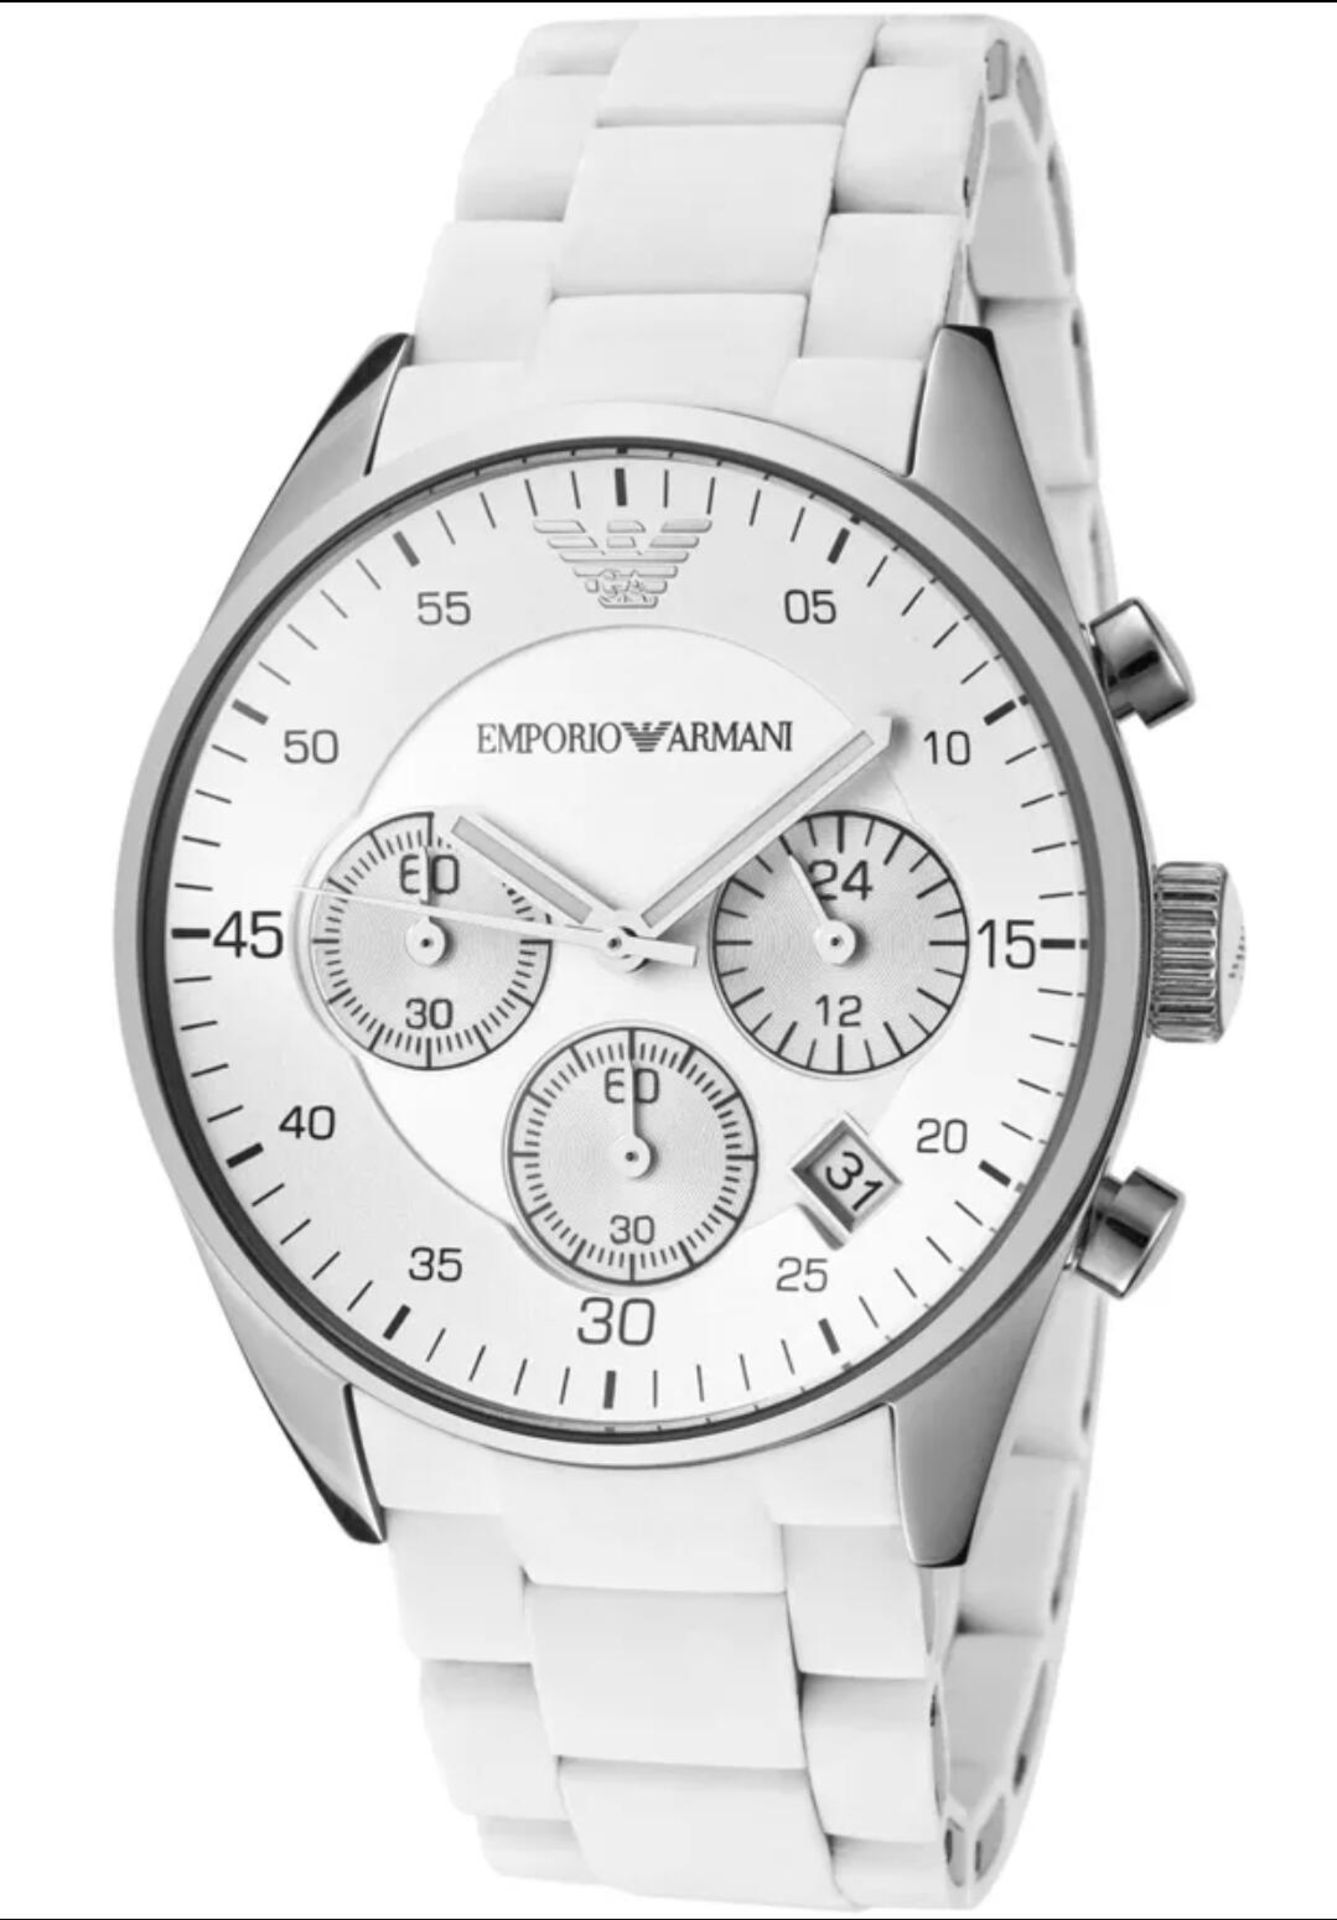 BRAND NEW EMPORIO ARMANI AR5867, LADIES SPORTIVO CHRONOGRAPH WATCH, WITH A WHITE SILICONE OVER STEEL